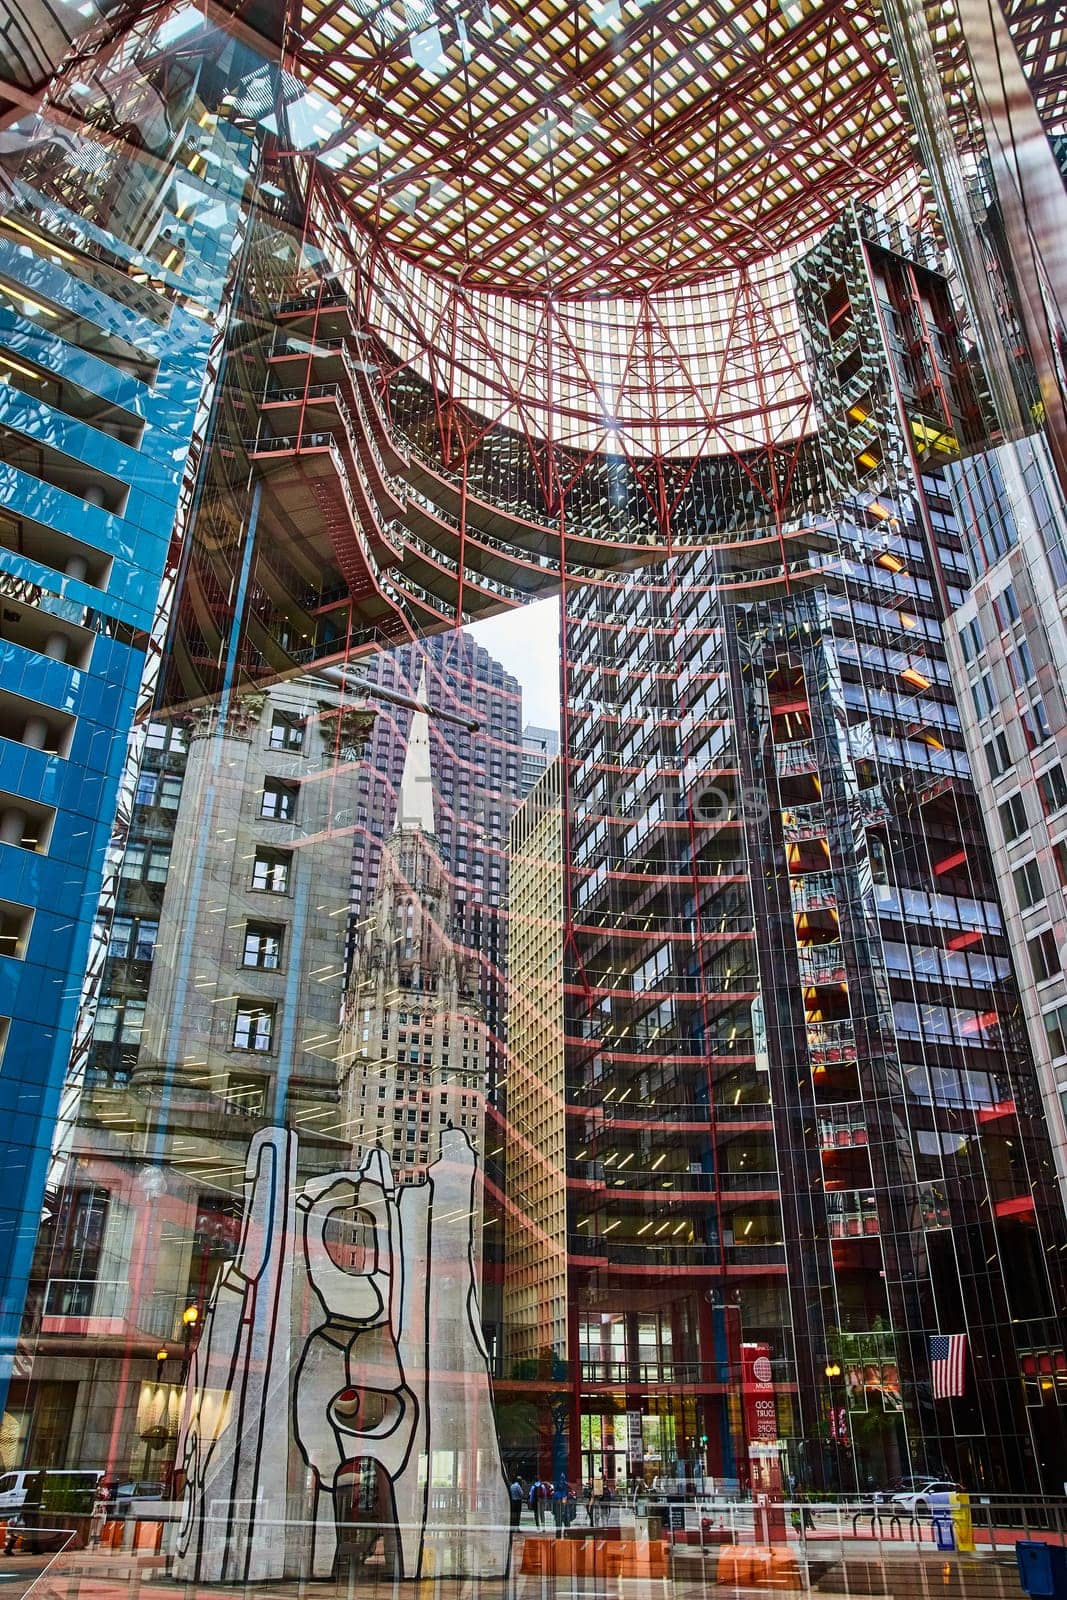 Image of Chicago skyscrapers with overlay of reflection of James R Thompson building